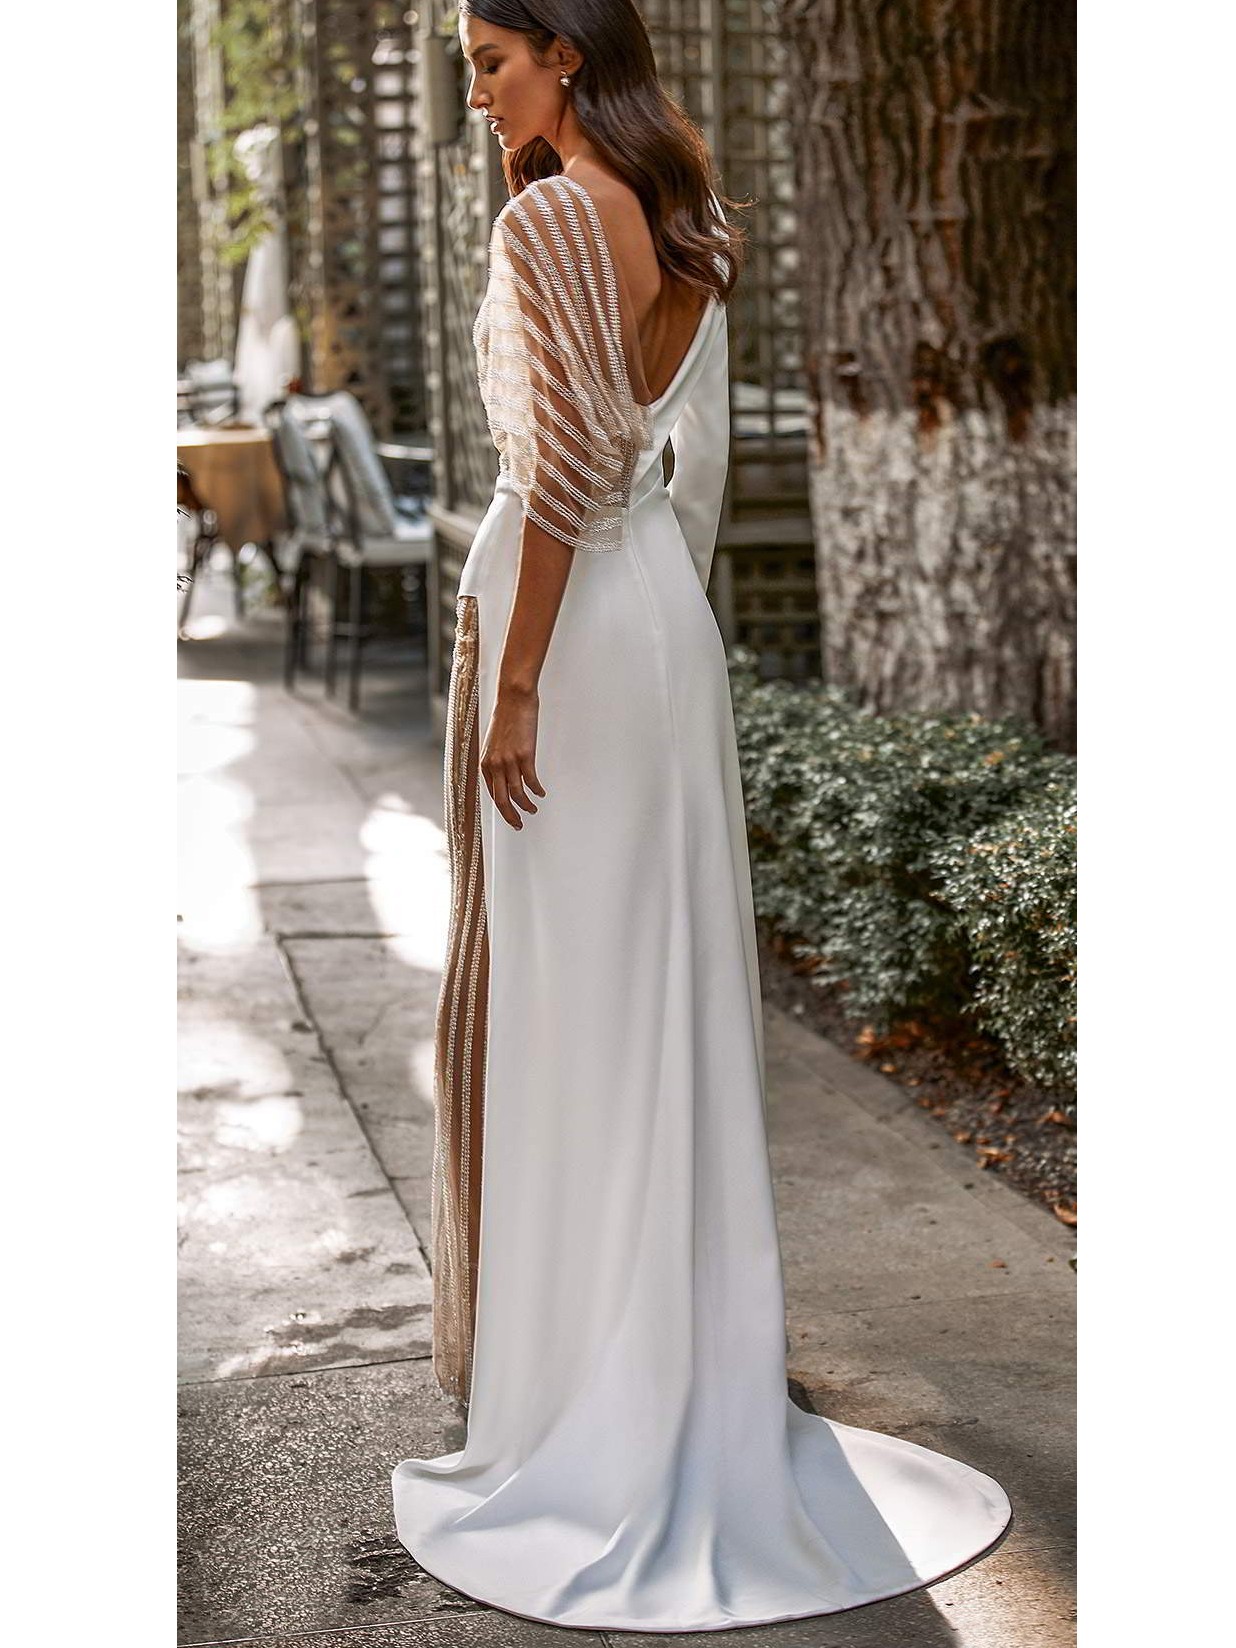 Dress 3 Inspirated By Katy Corso 2021 Wedding Dresses